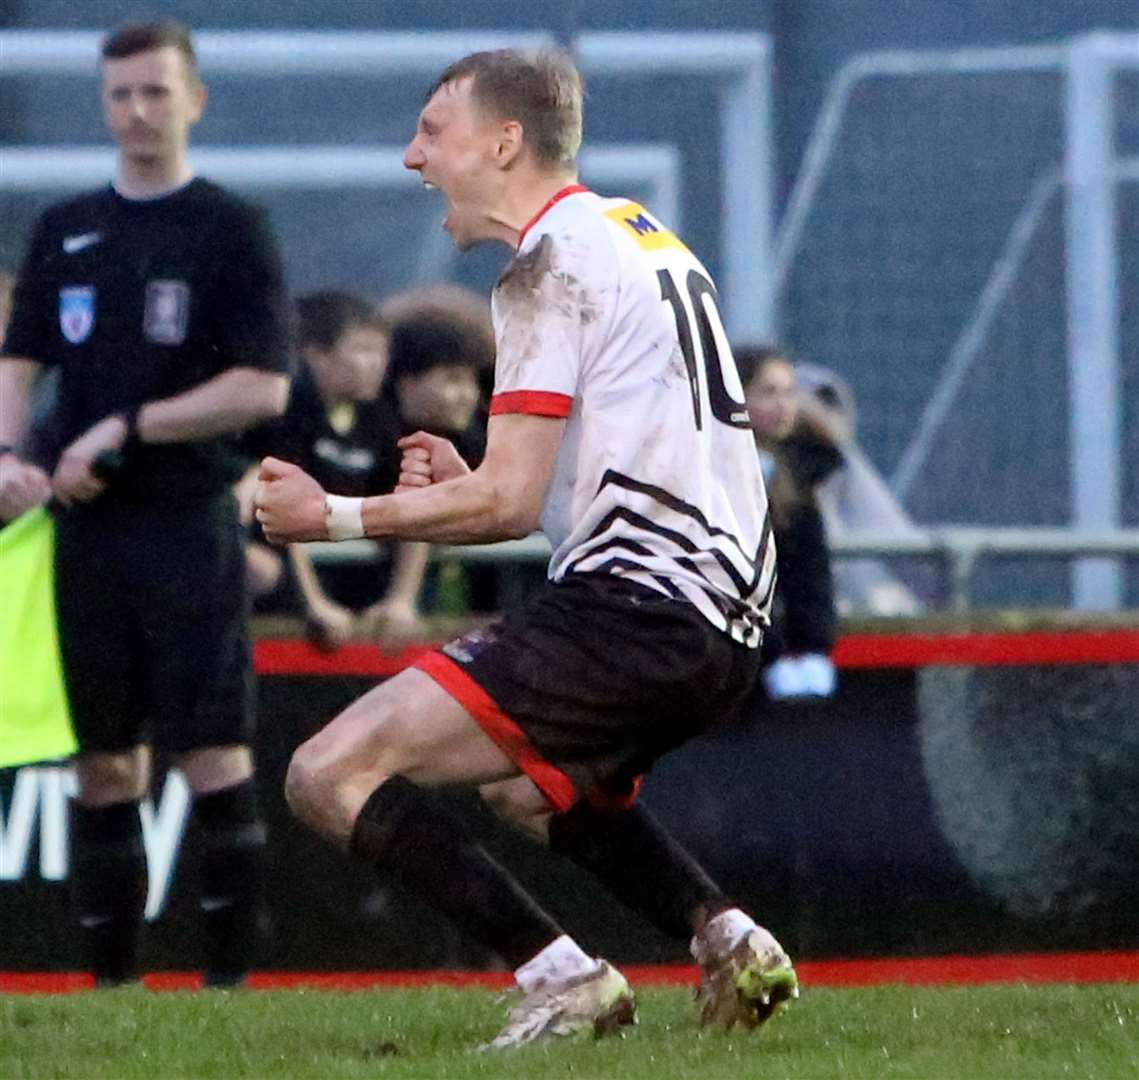 Ben Chapman scores the winning spot-kick for Deal as they beat Bridgwater United on penalties after a 2-2 draw to progress to the FA Vase Quarter-Finals on Saturday. Picture: Paul Willmott